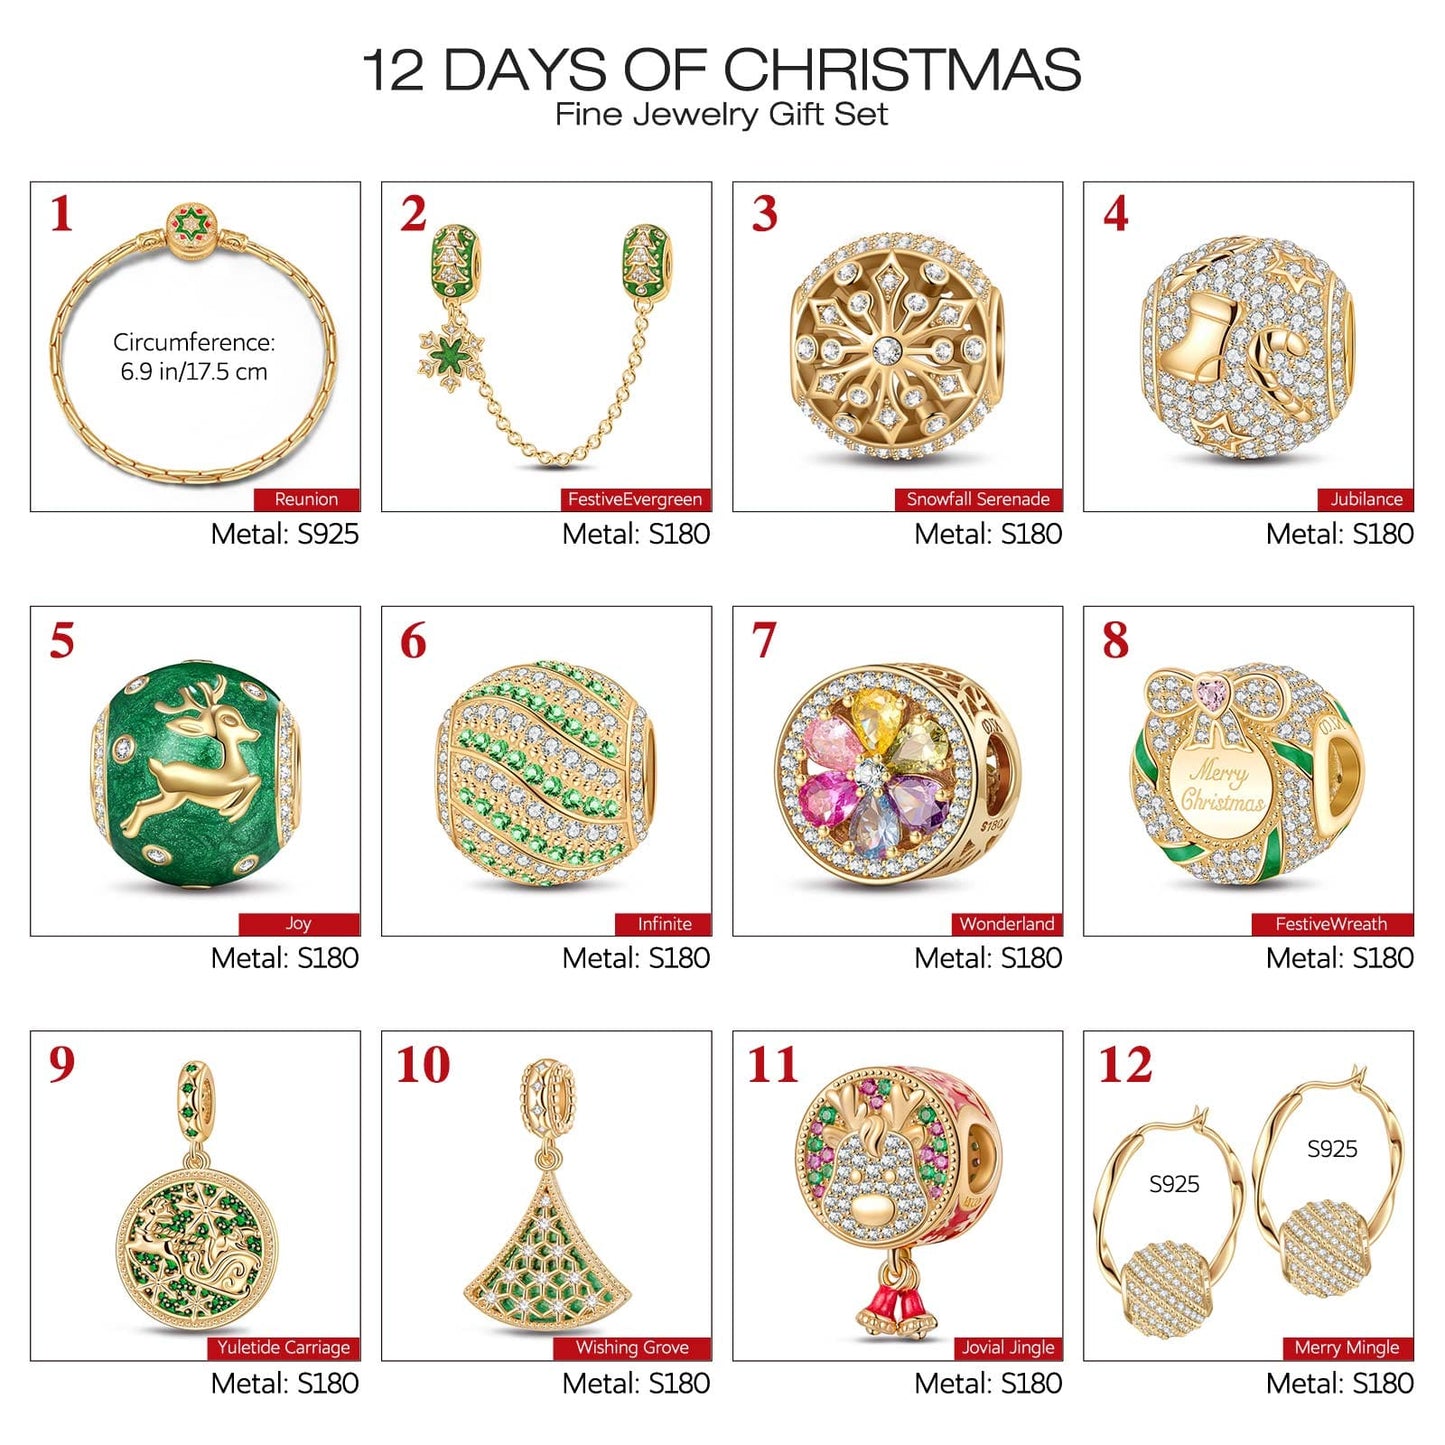 The Iconic Advent Calendar - 12 Days of Christmas Fine Jewelry Gift Set: Sterling Silver Christmas Green Earrings and Charms Bracelet Set With Enamel In 14K Gold Plated